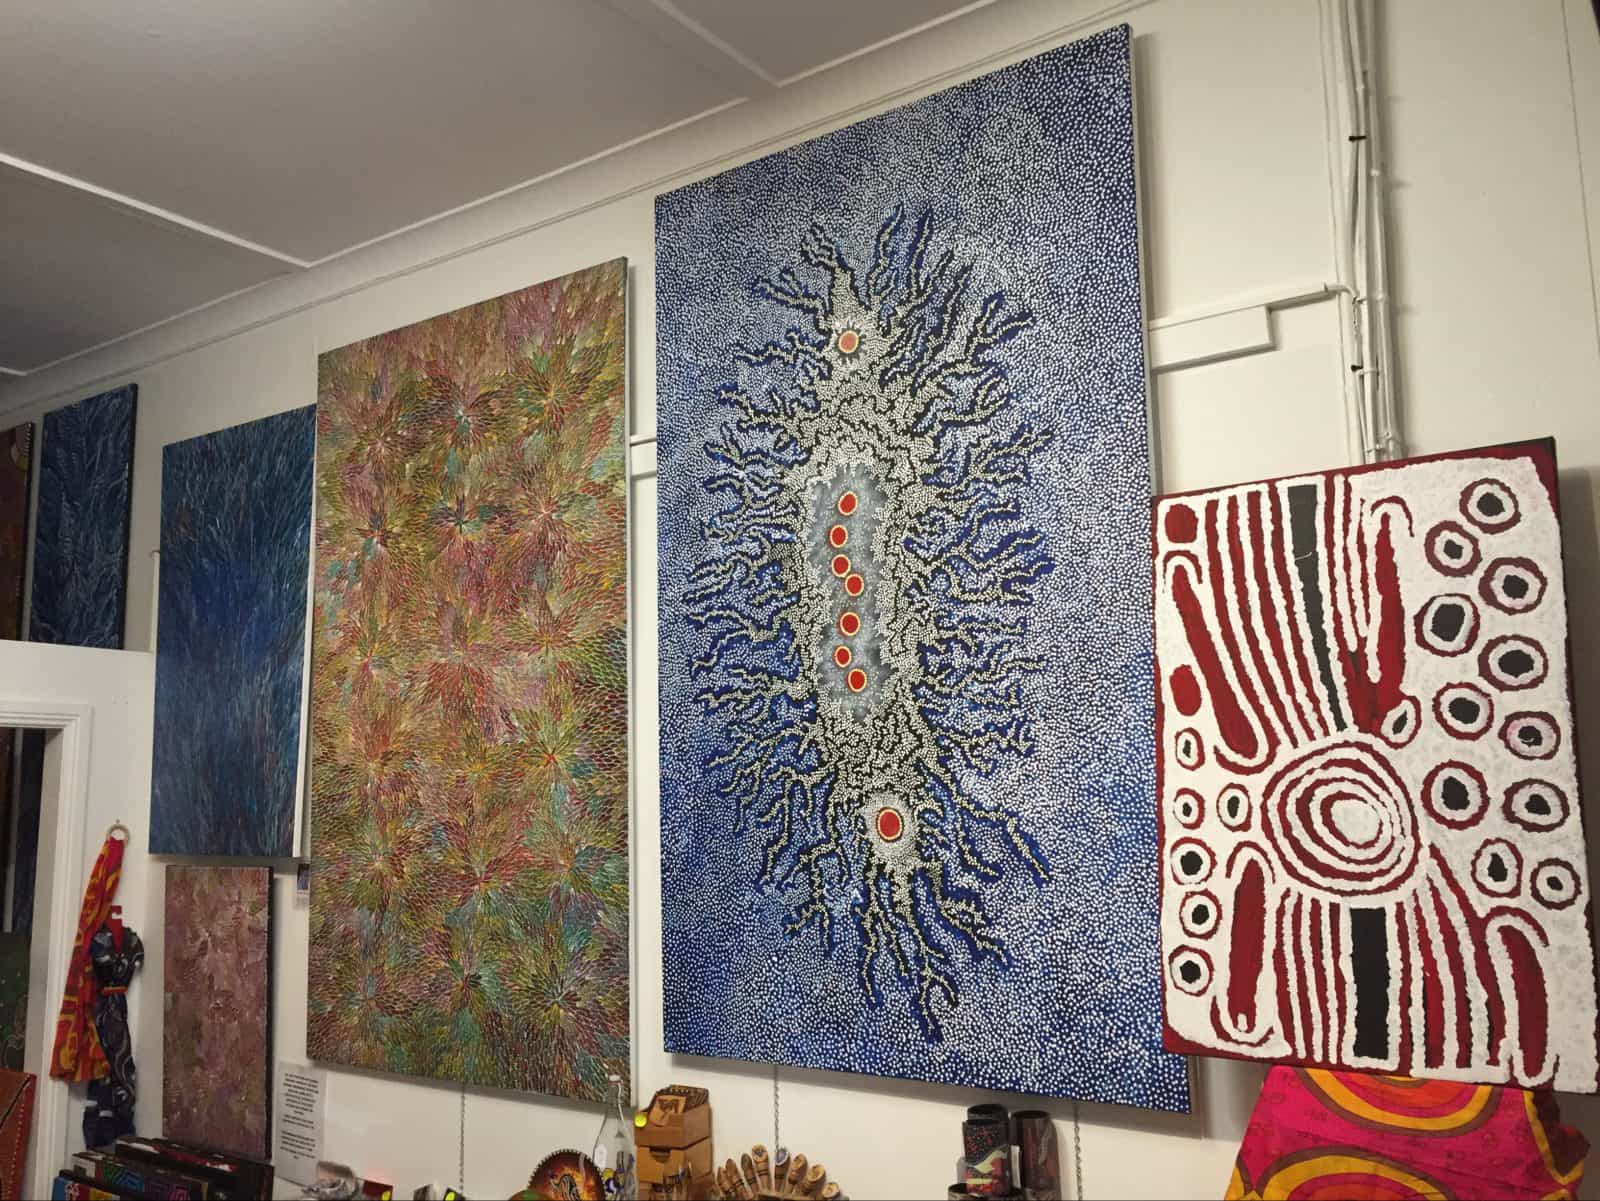 Aboriginal Art in the gallery space